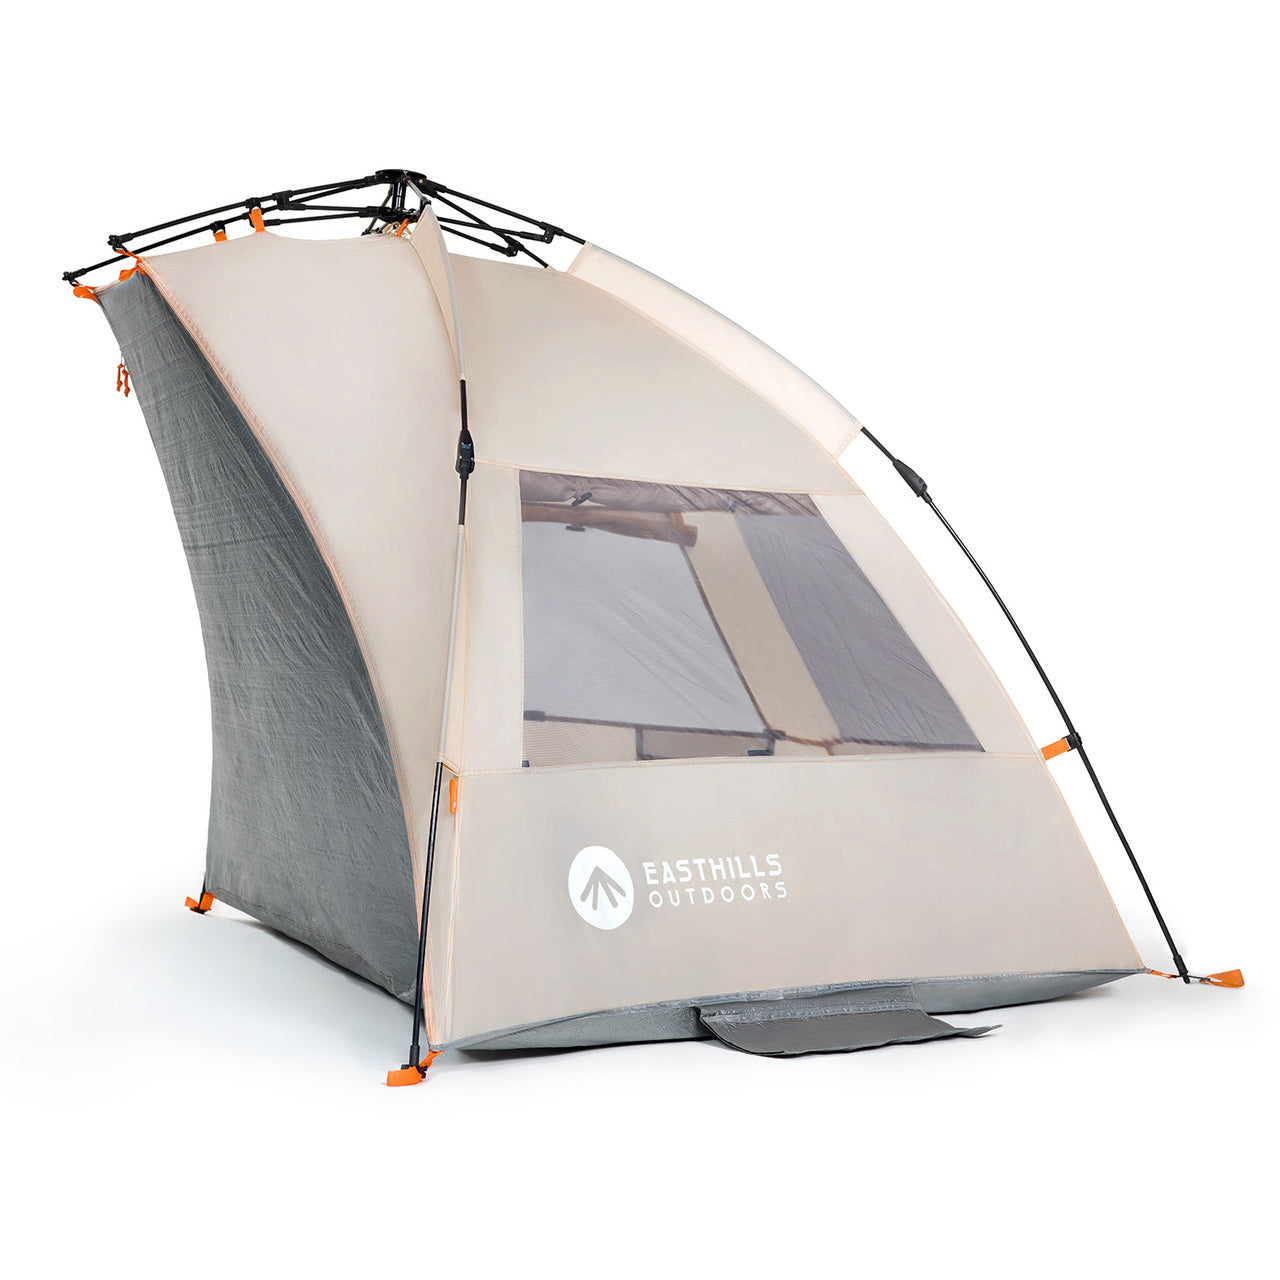 Easy Up Tent | Easthills Outdoors – EasthillsOutdoors